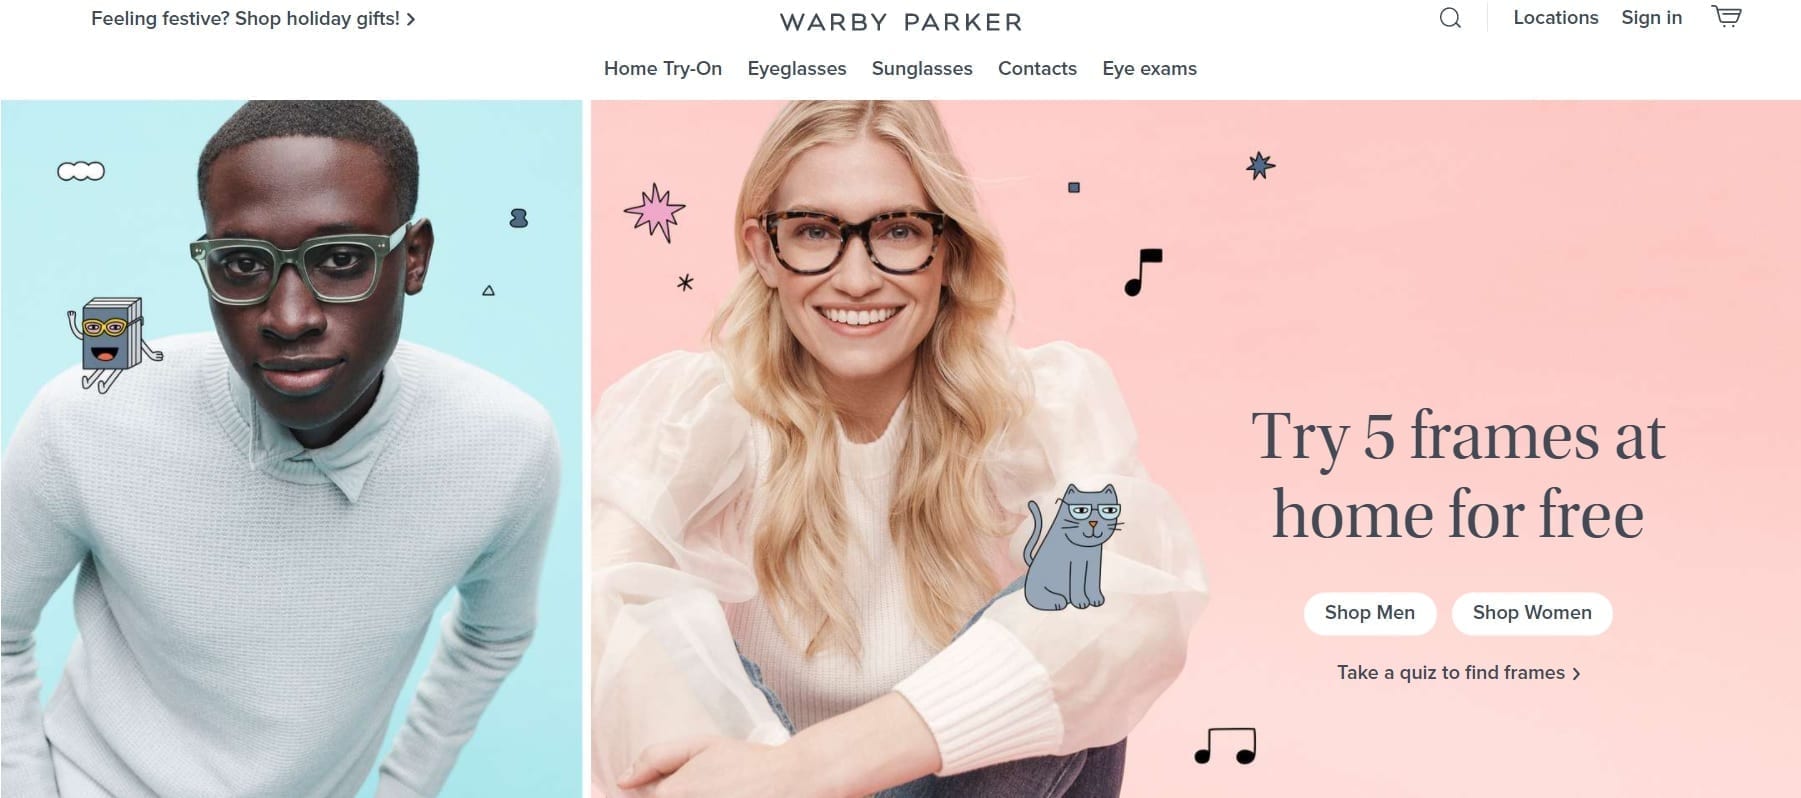 Warby Parker homepage